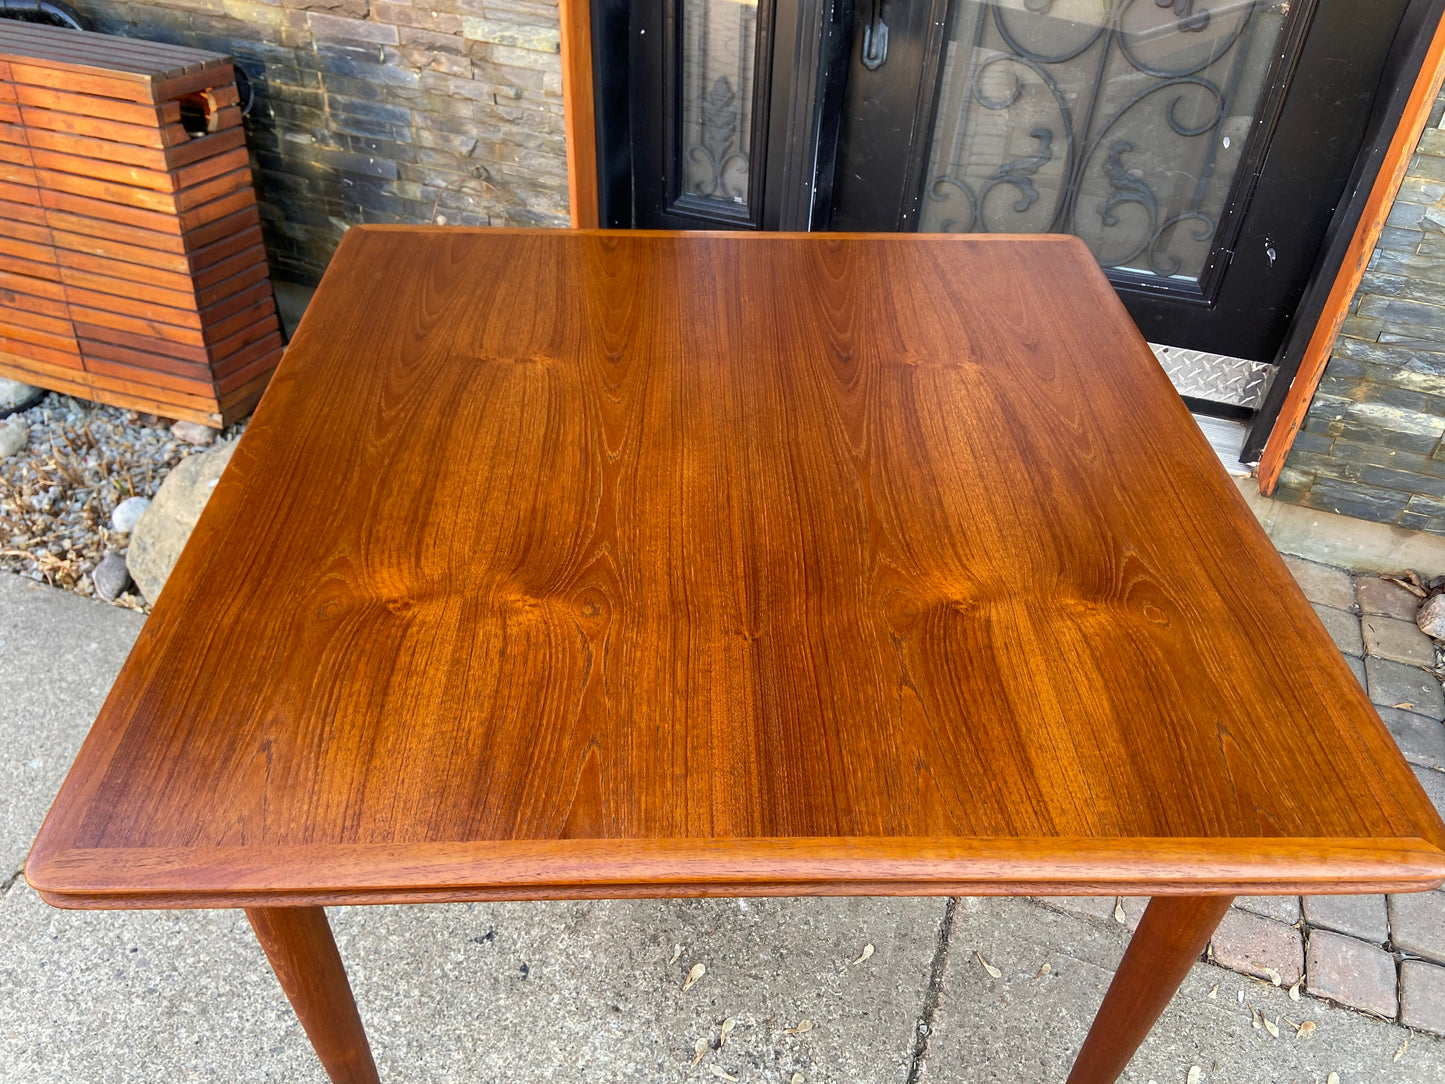 REFINISHED Danish MCM Teak Draw Leaf Table by A. H. Olsen for Skovmand & Andersen, 39"-75", PERFECT